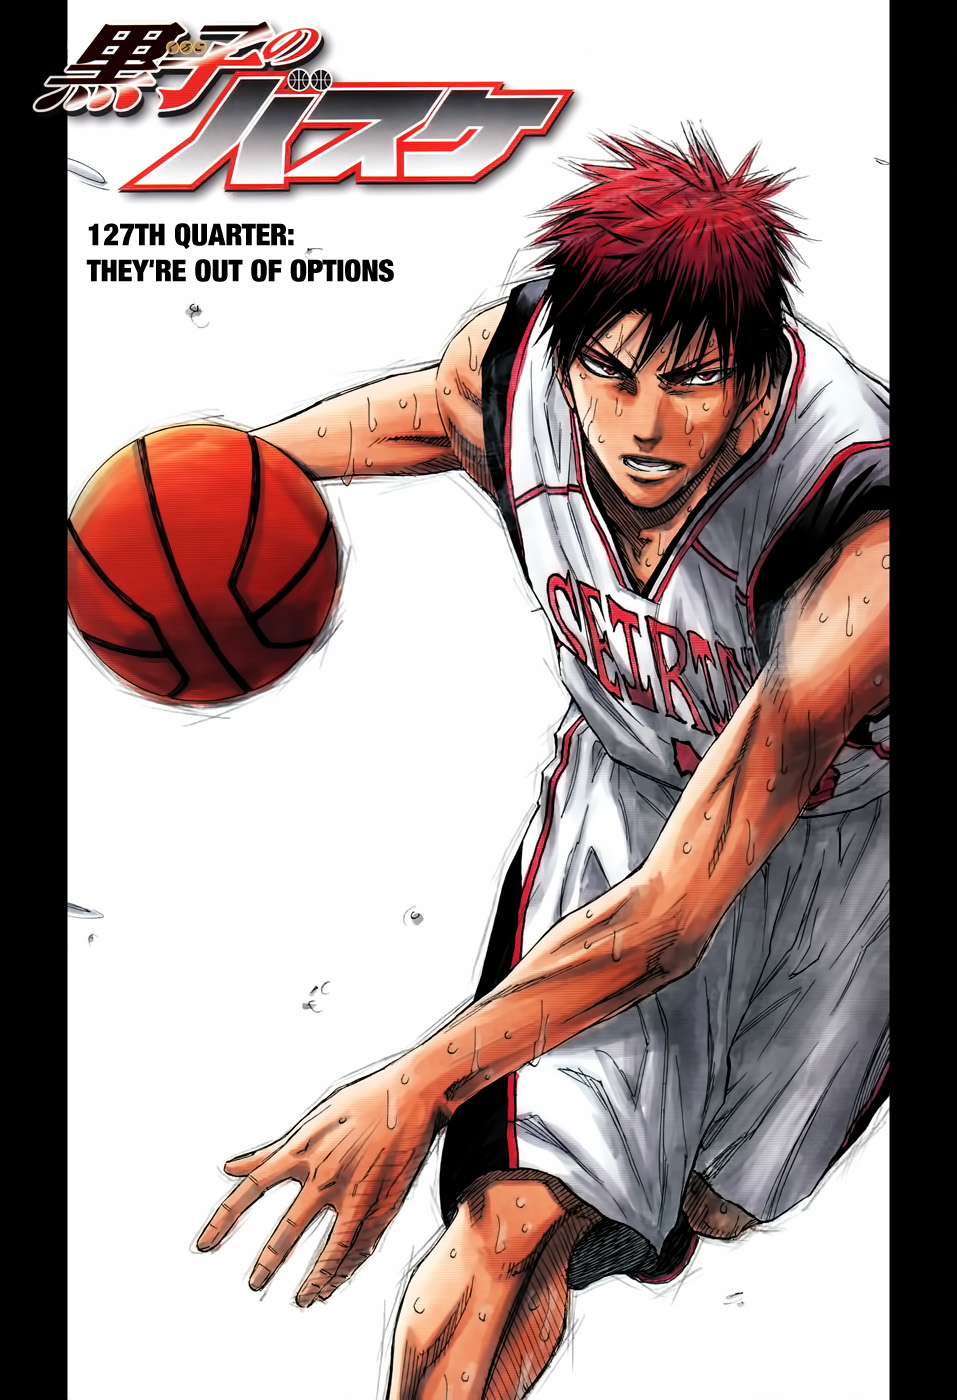 KnB Inspirations — admit it, we either have Hayama's omg yay look